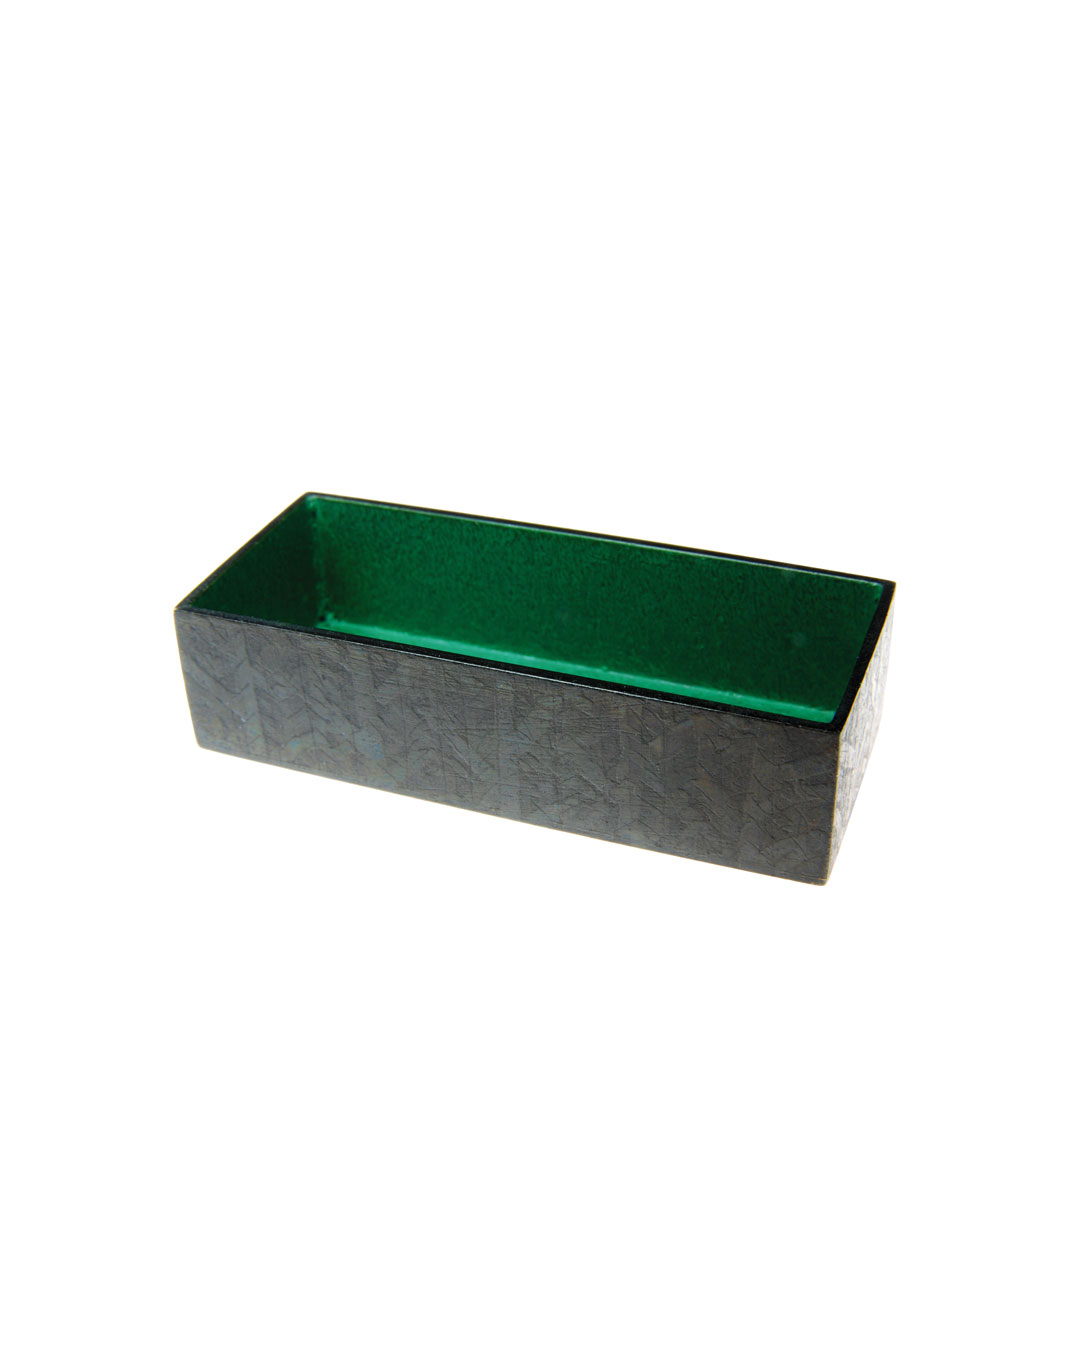 Tore Svensson, Box, 2009, brooch; etched and painted steel, 60 x 25 x 15 mm, €520